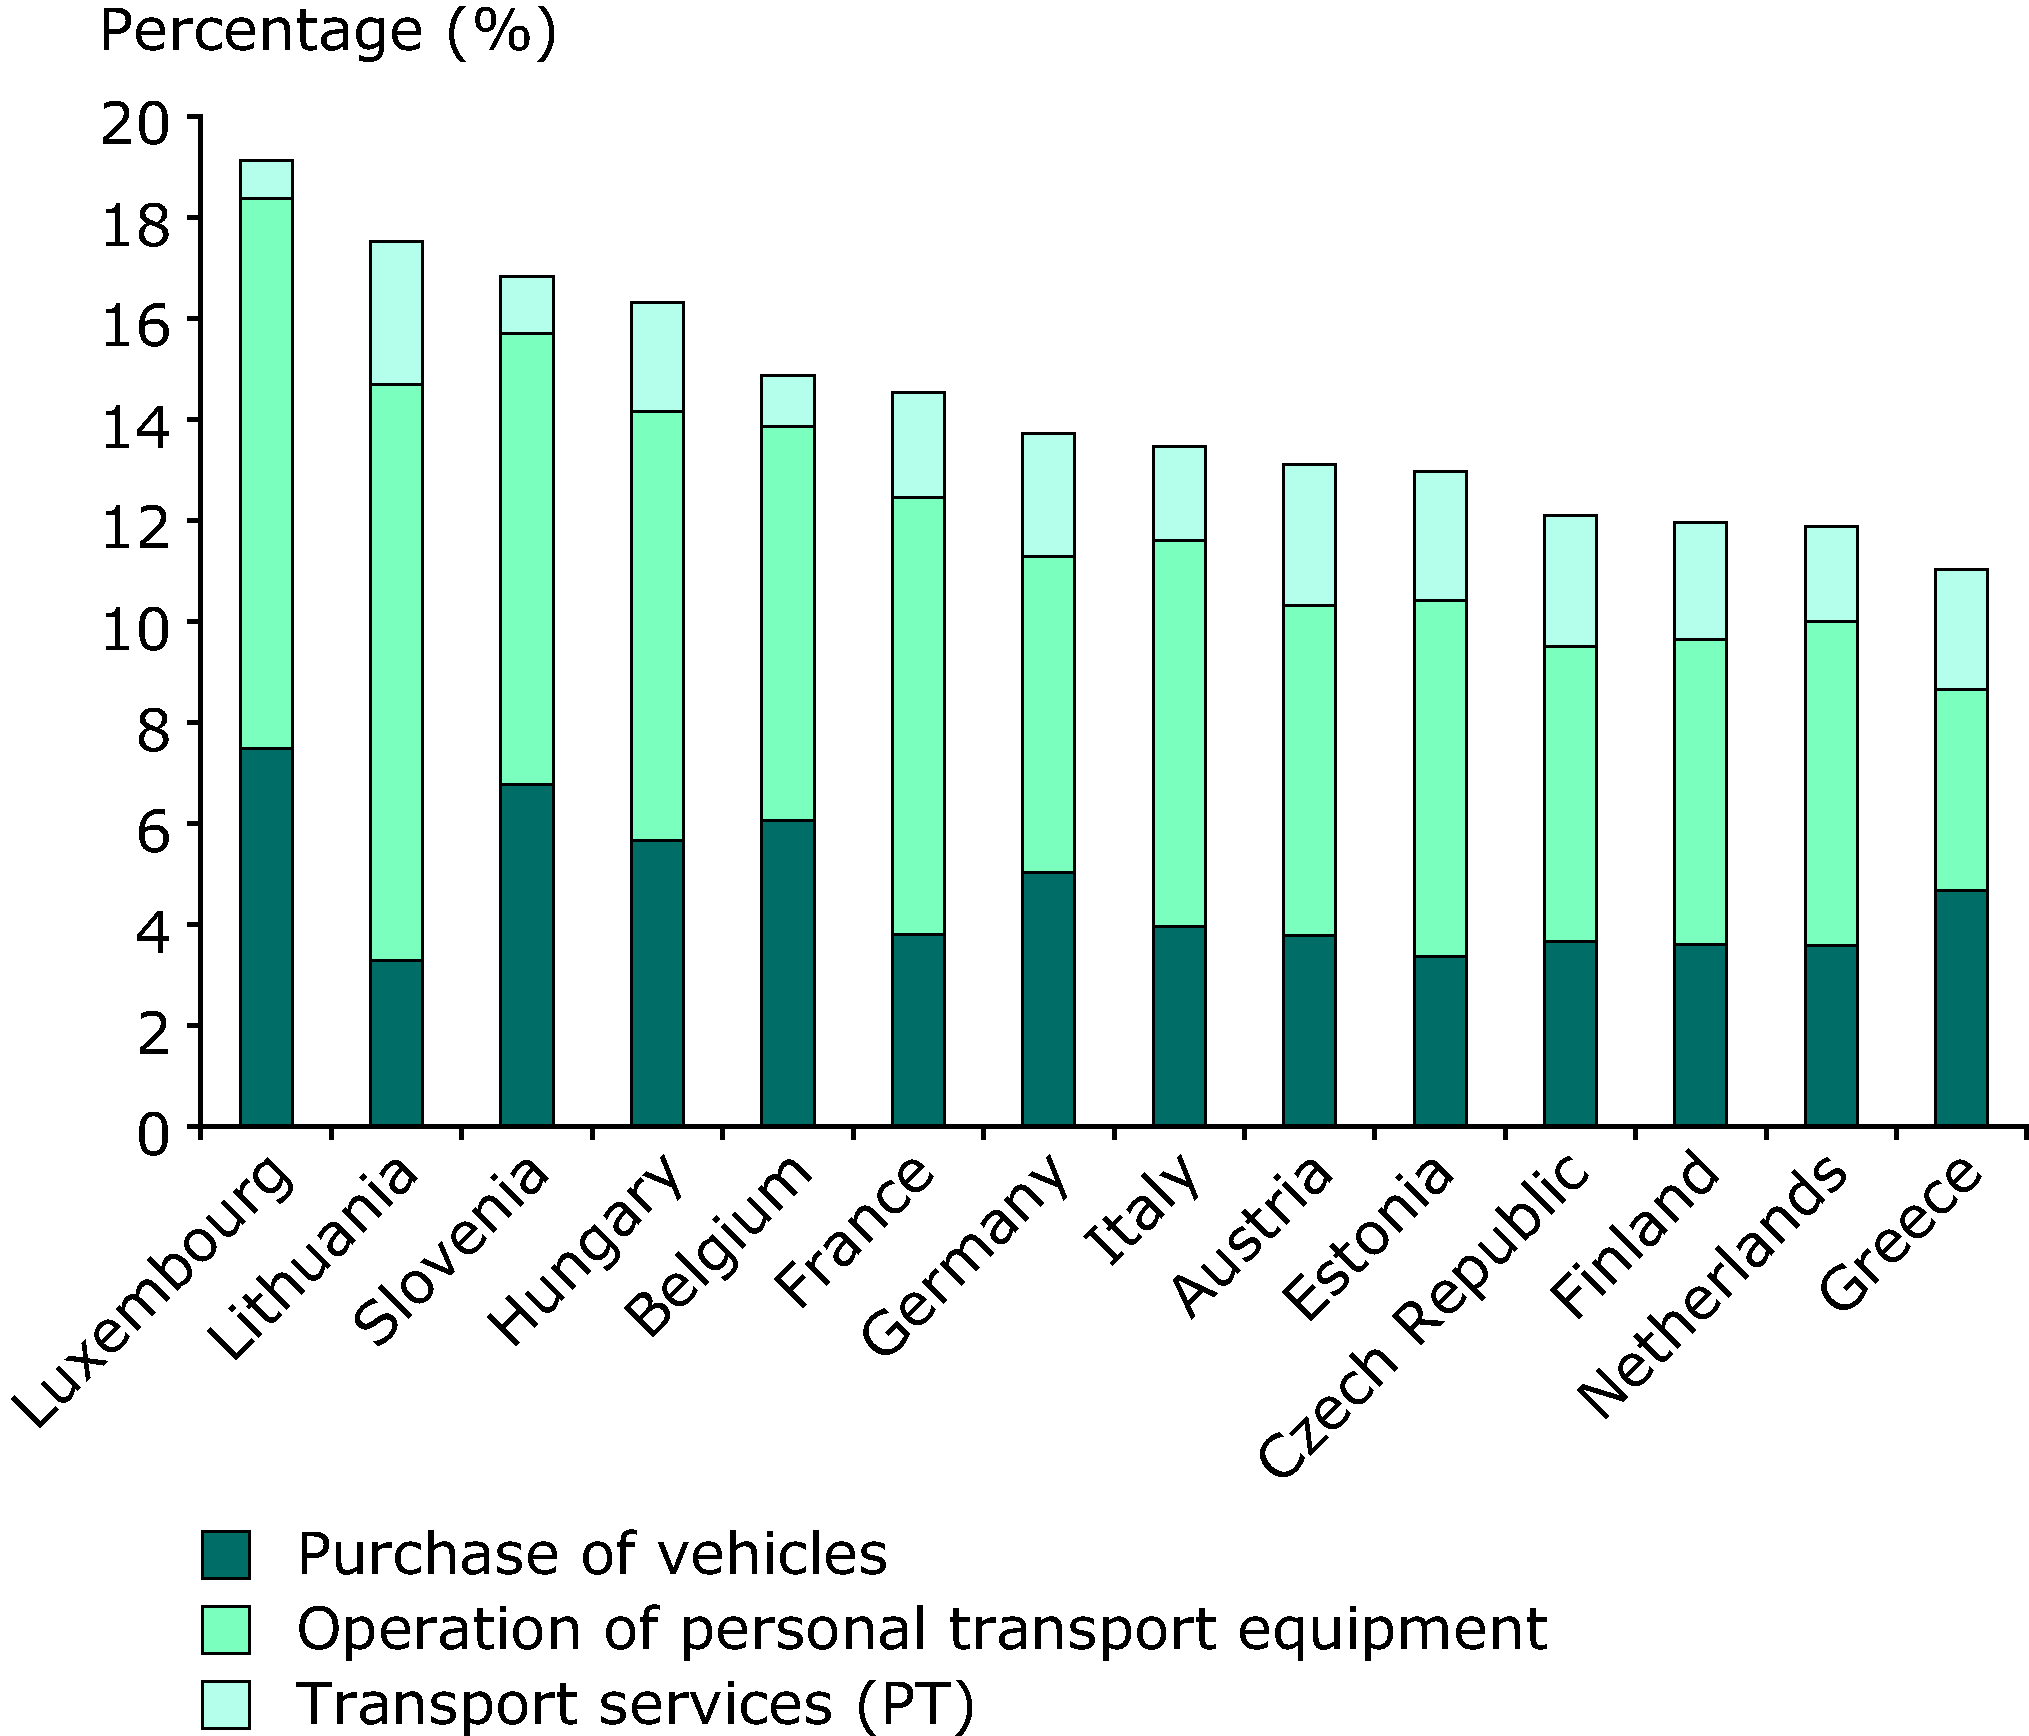 Share of household expenditure on transport services across countries (% of total spending, 2007)